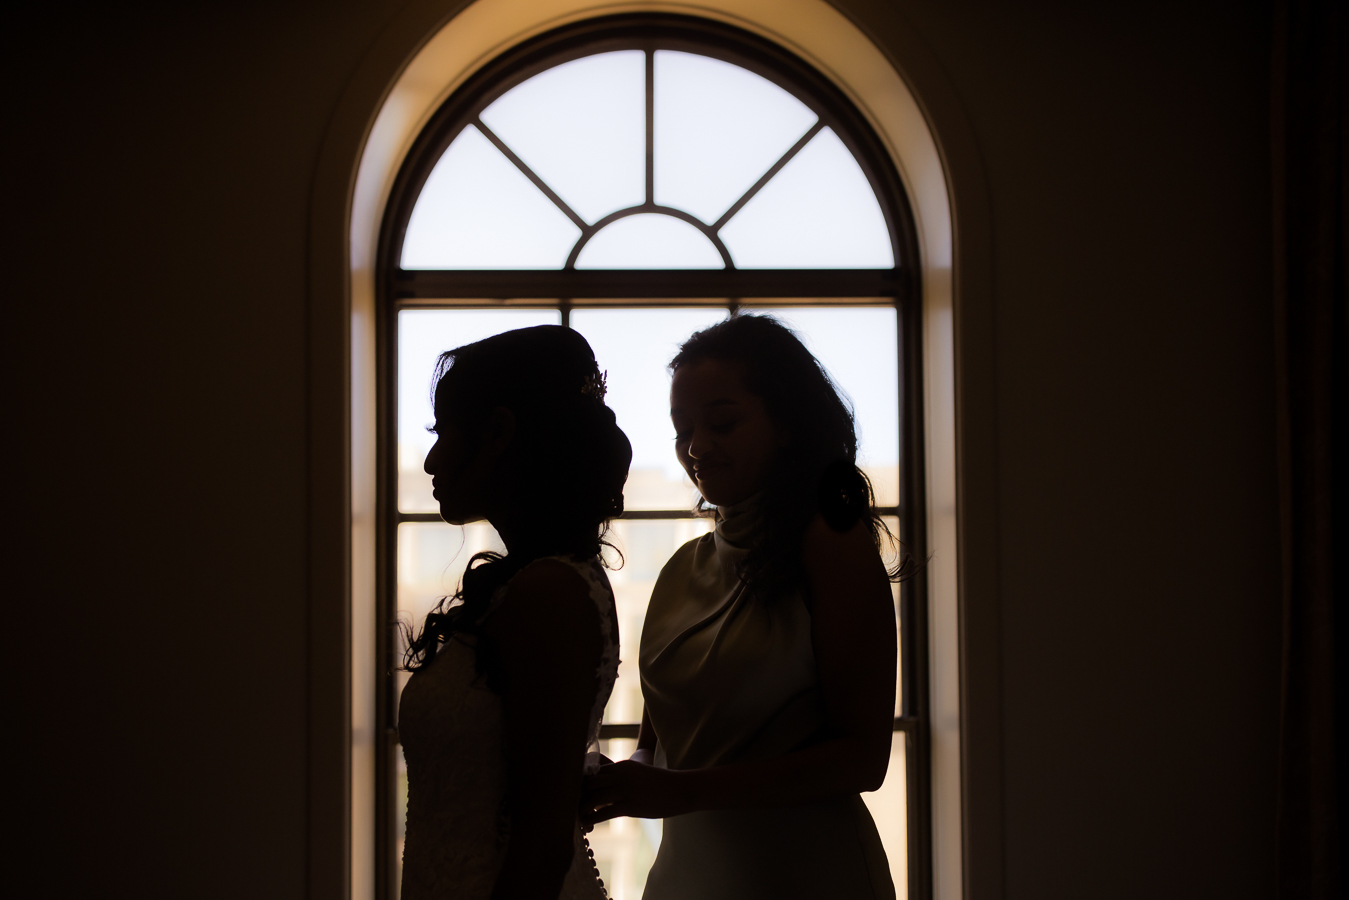 creative dc wedding photographer, Lisa Rhinehart, captures this unique silhouette of the brides wedding dress being buttoned up by her maid of honor during her wedding preparations at the st regis hotel in Washington DC